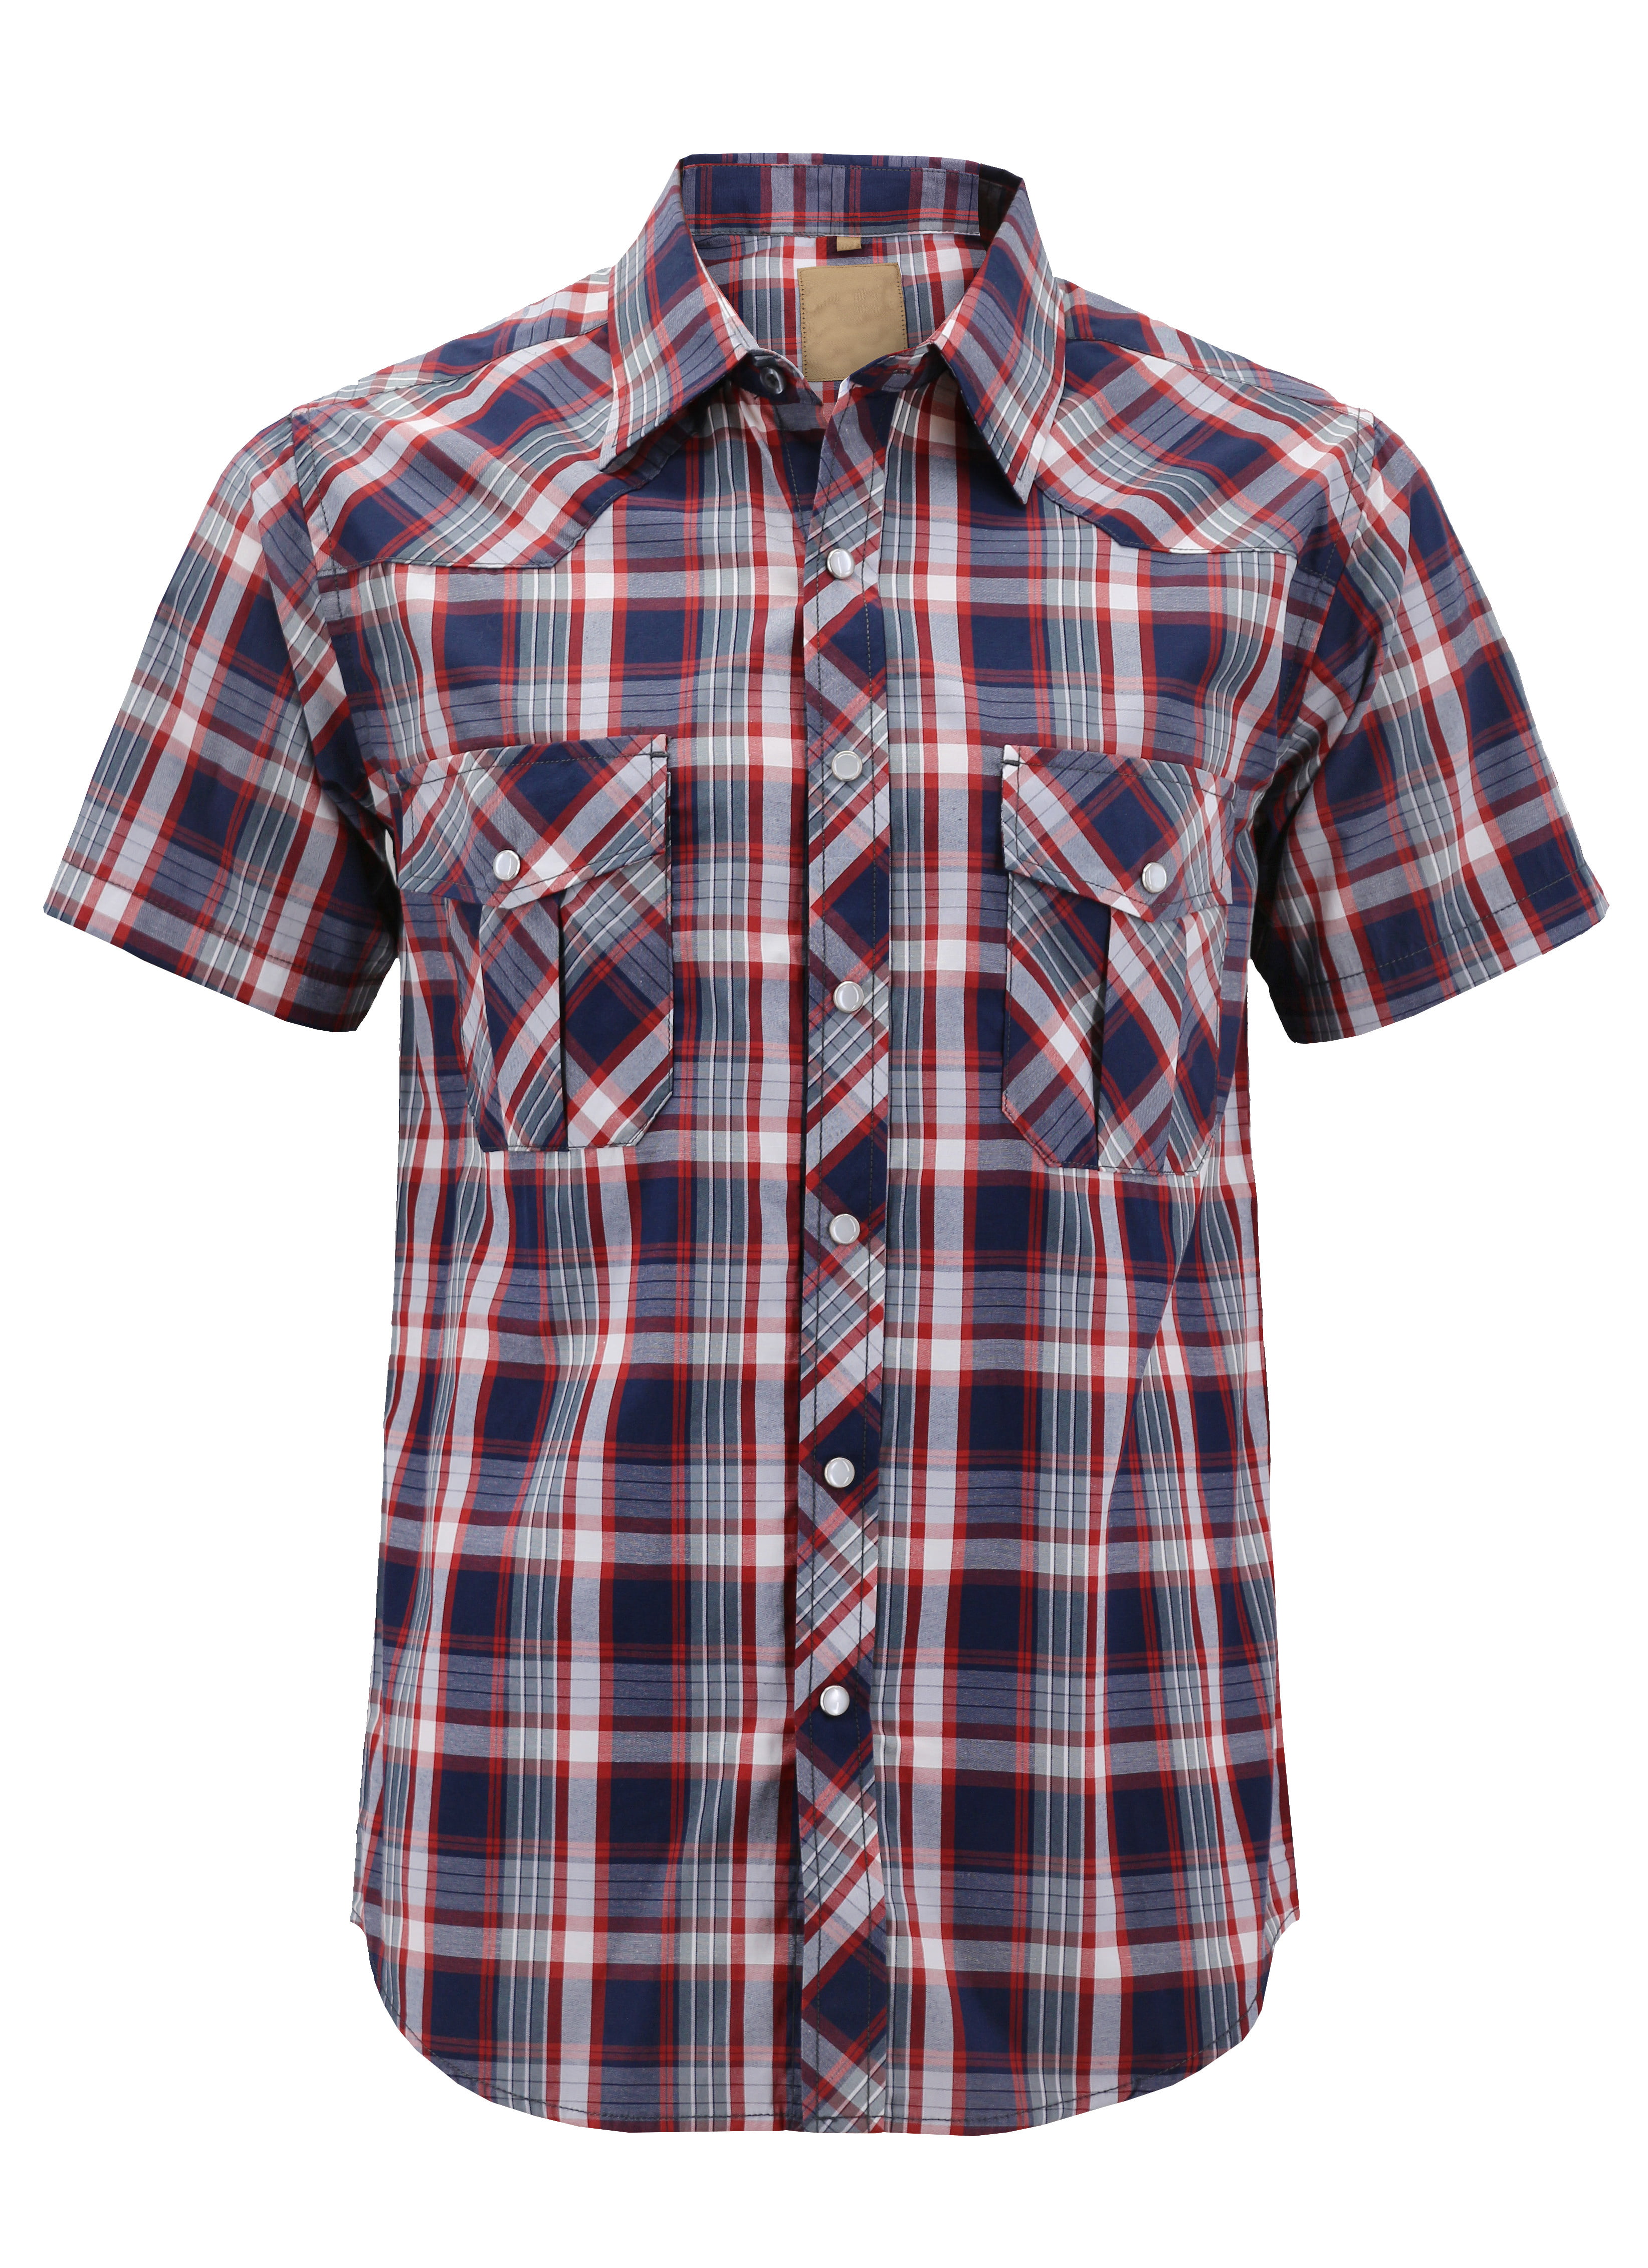 VKWEAR - Men’s Western Short Sleeve Button Down Casual Plaid Pearl Snap ...